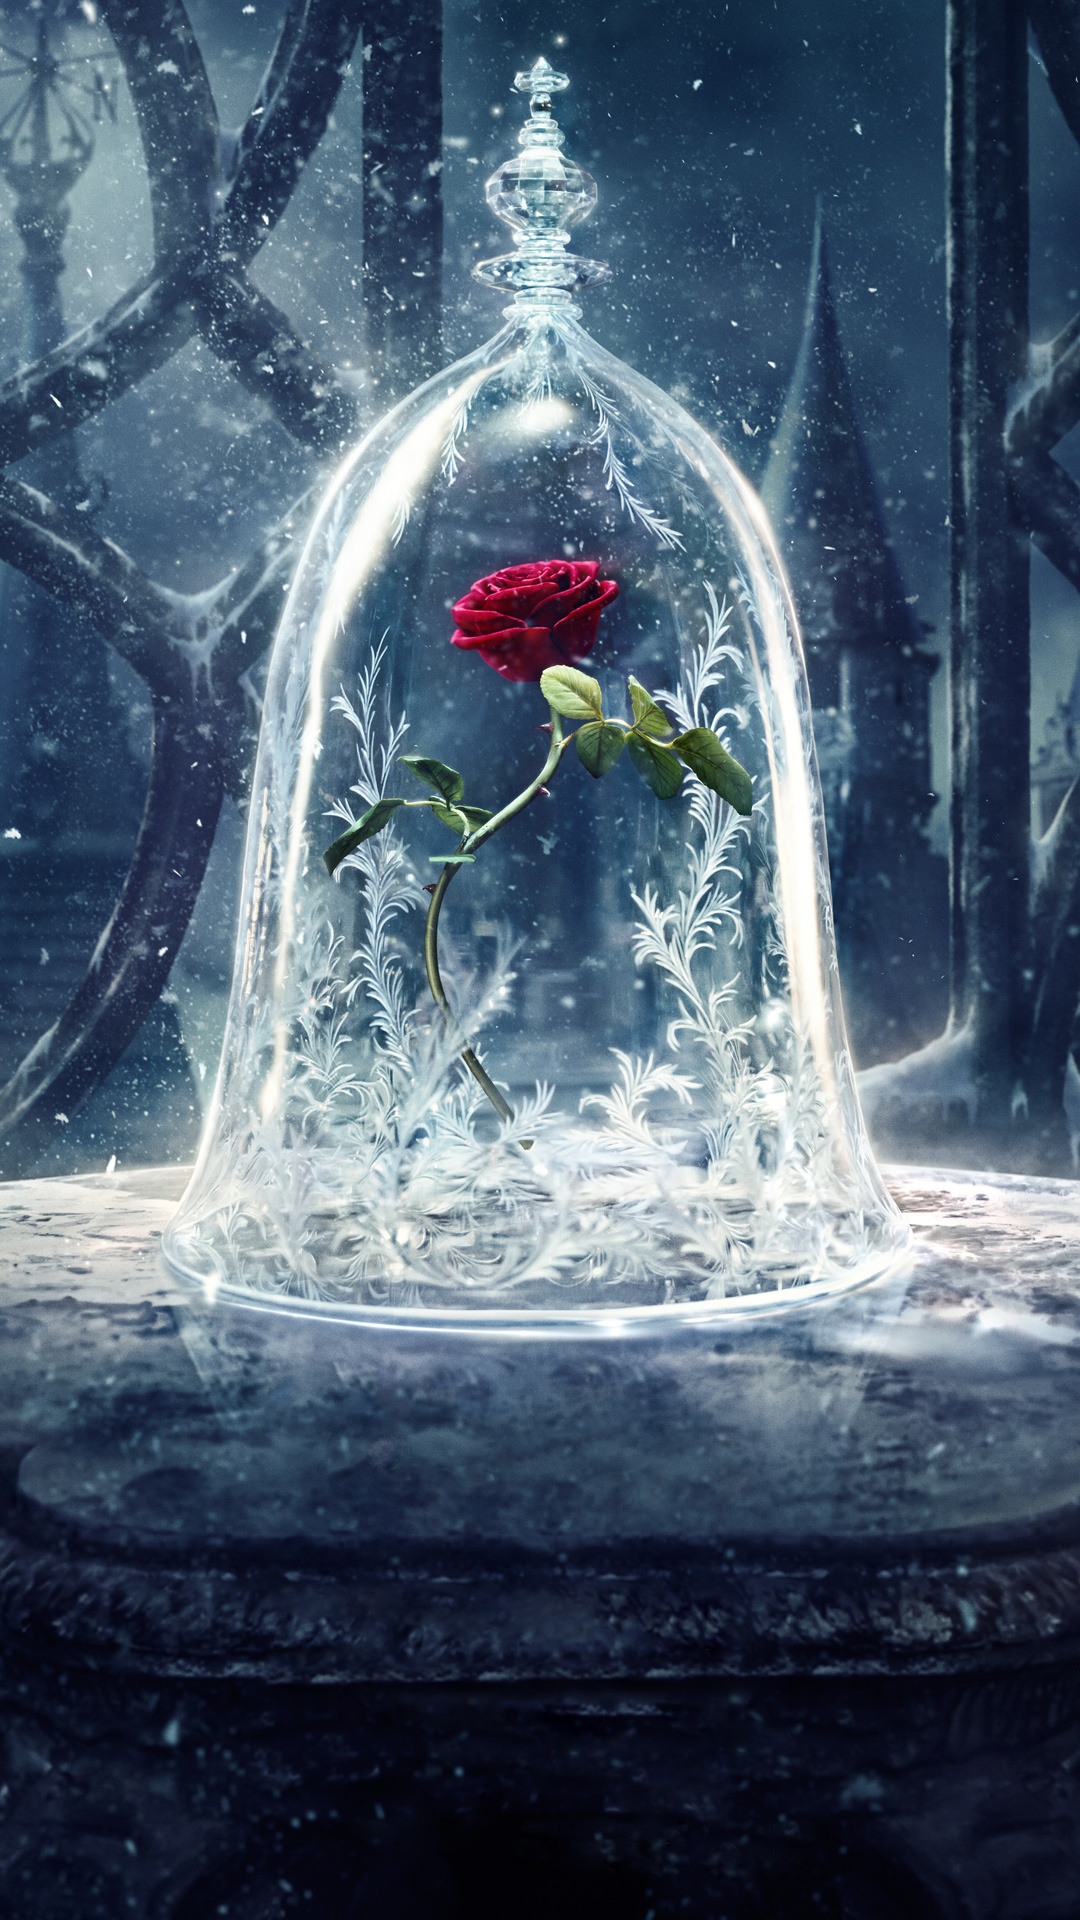 Beauty And The Beast - Rosa Beauty And The Beast - HD Wallpaper 